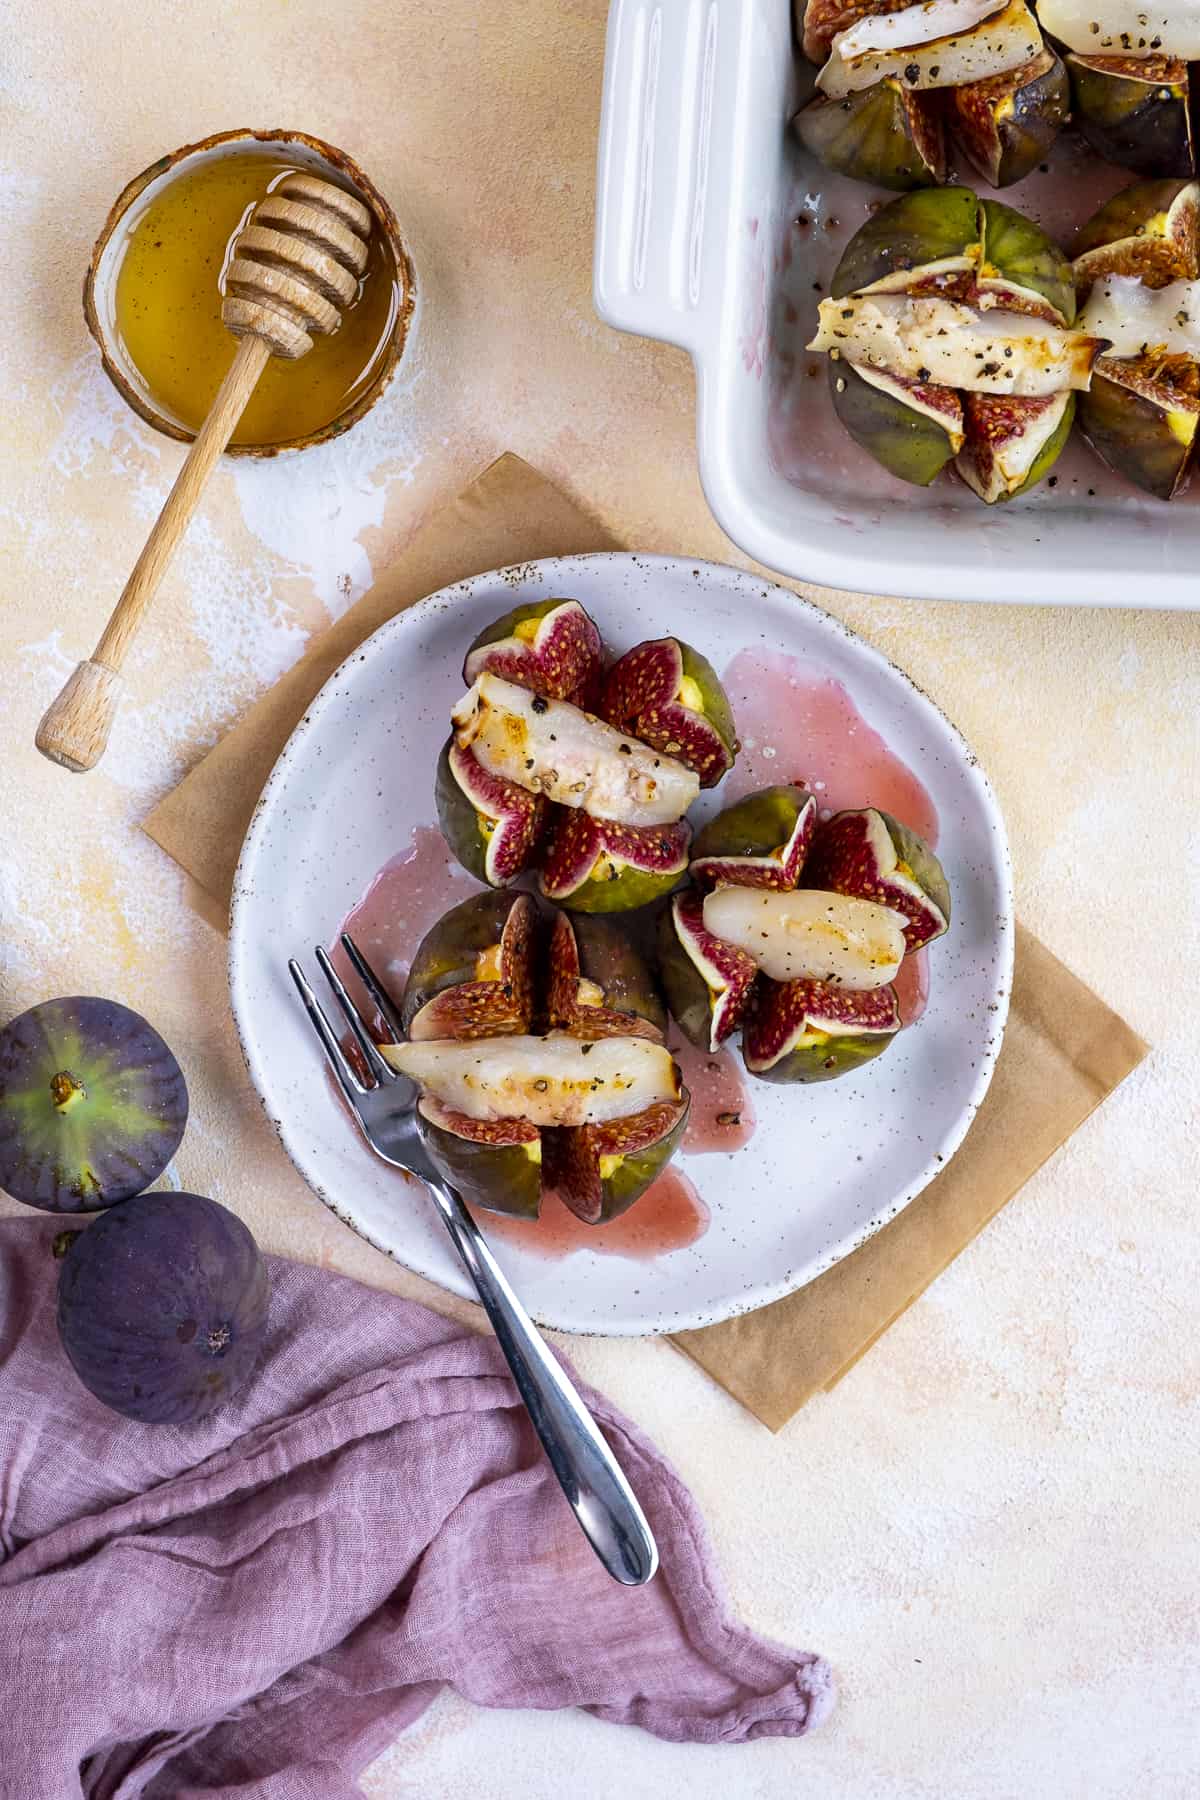 Figs stuffed with goat cheese served on a white plate.